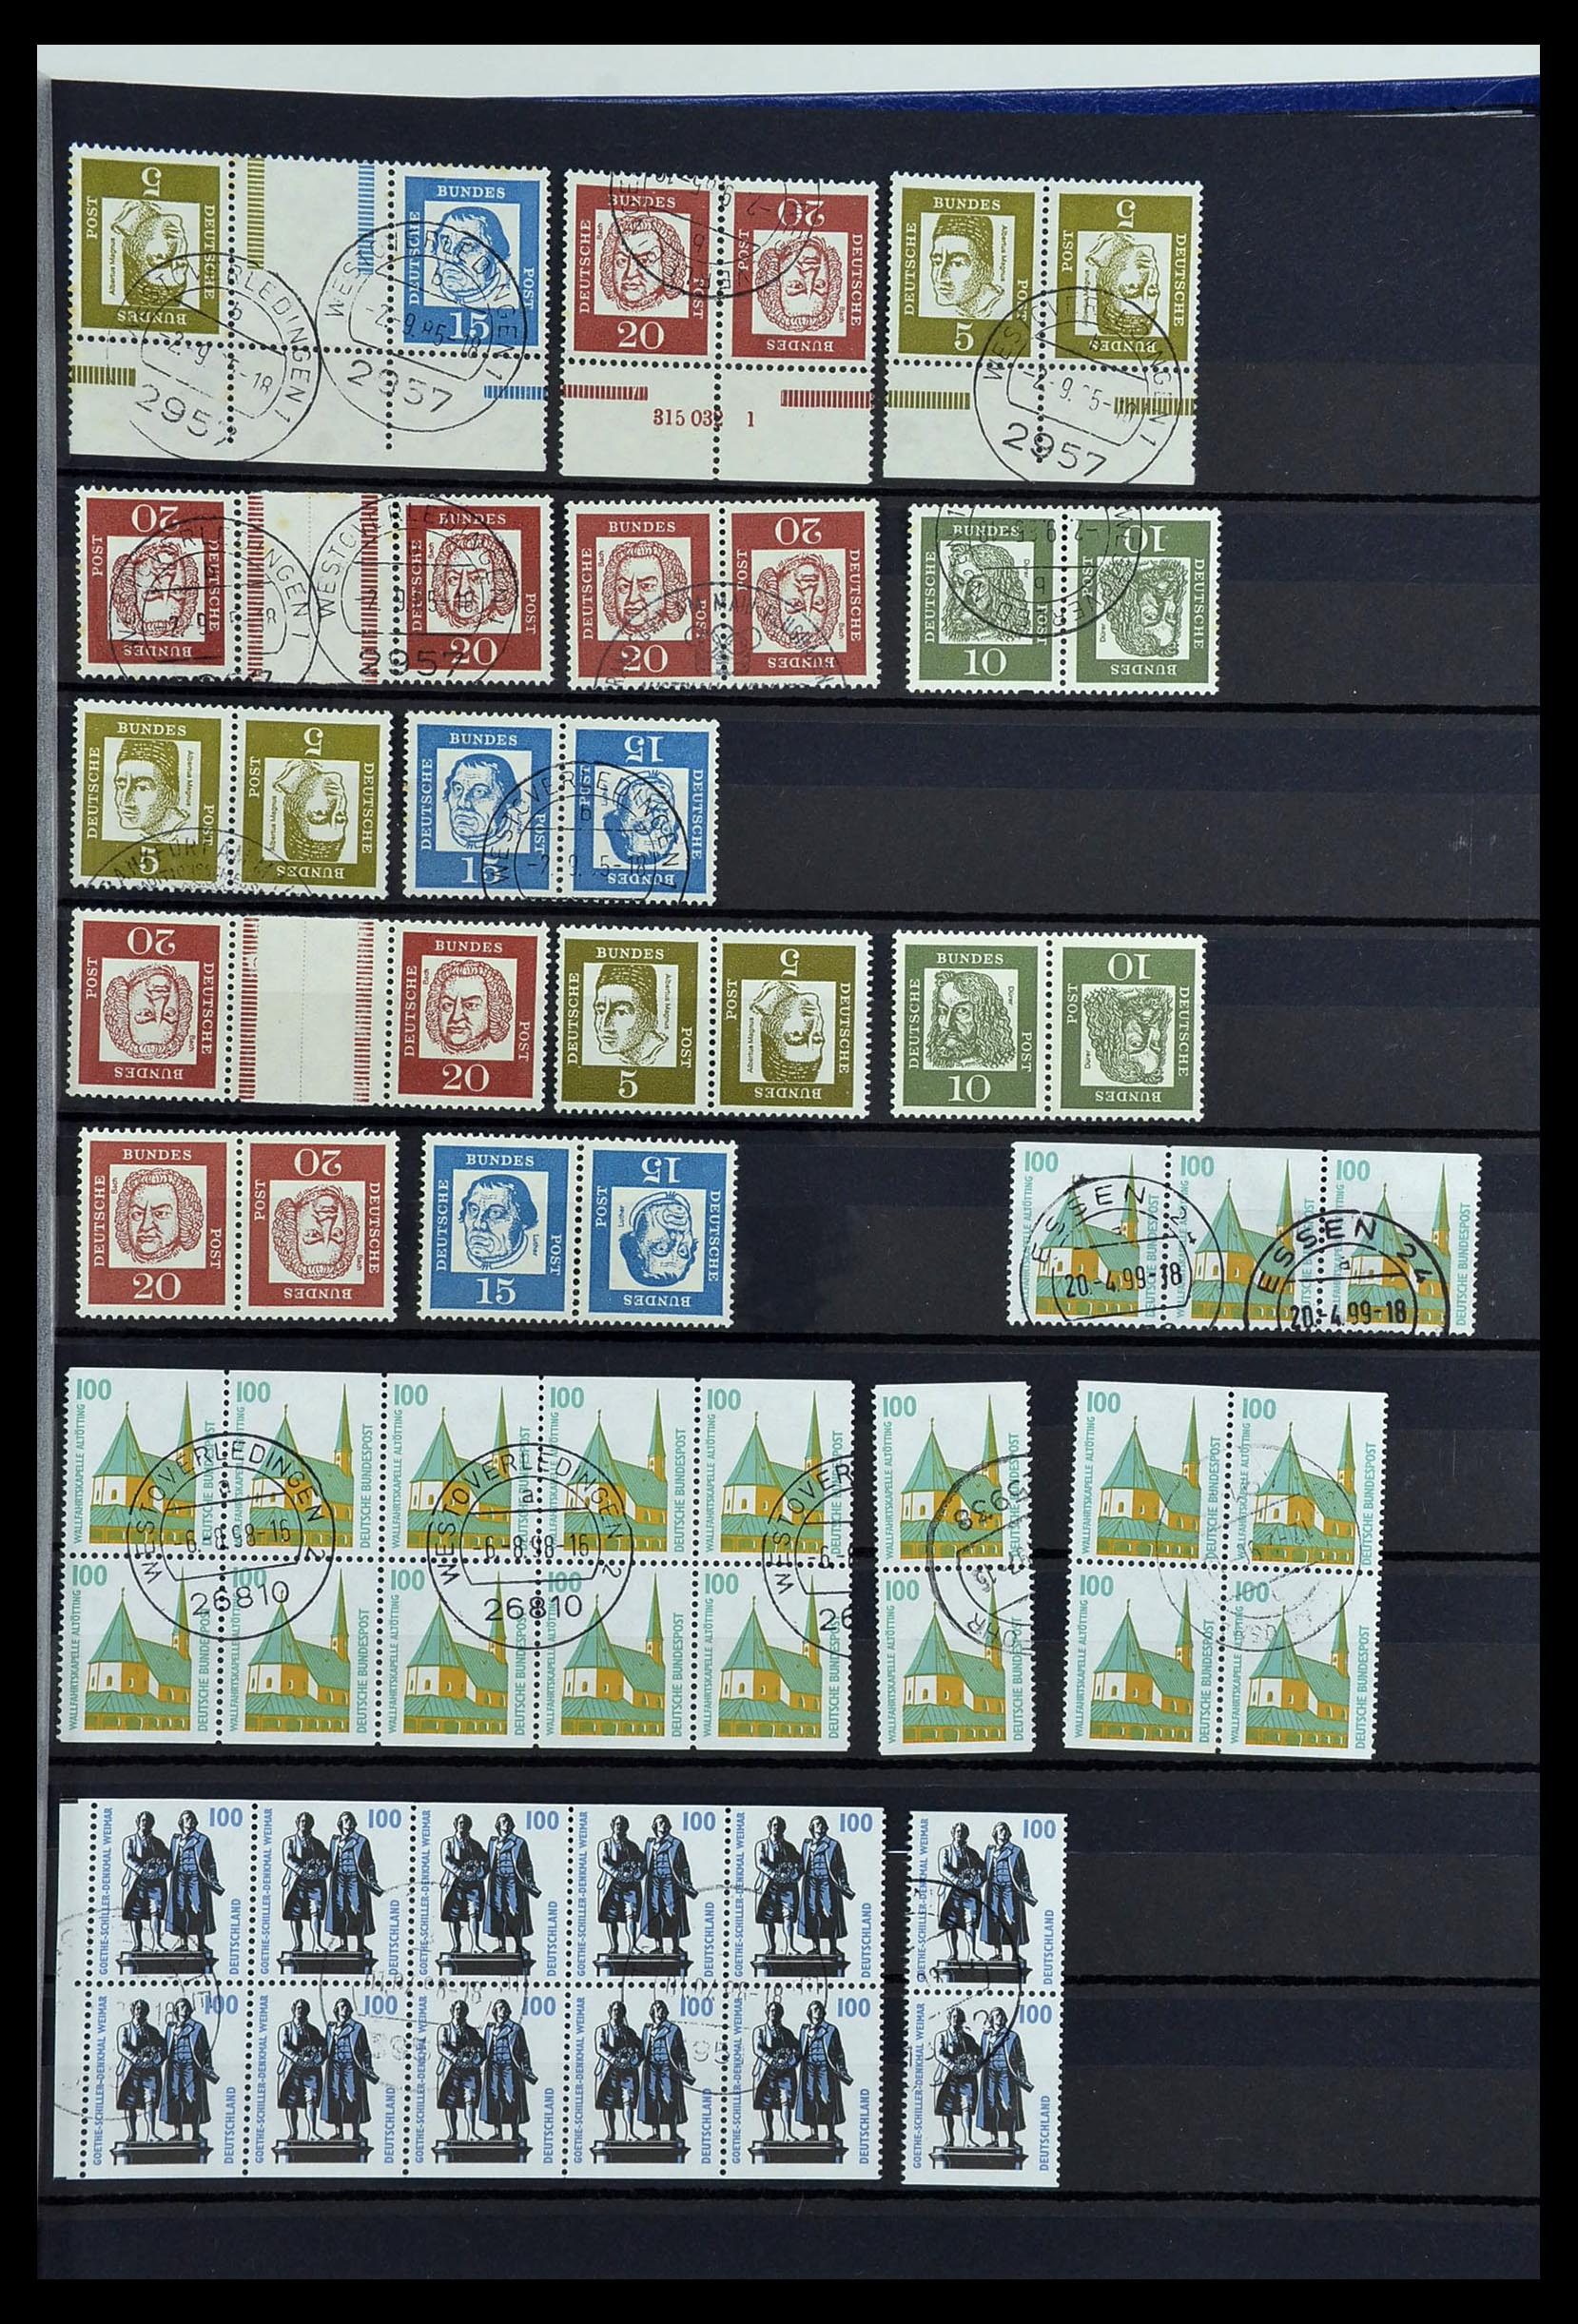 34003 005 - Stamp collection 34003 Bundespost combinations 1950-2020.